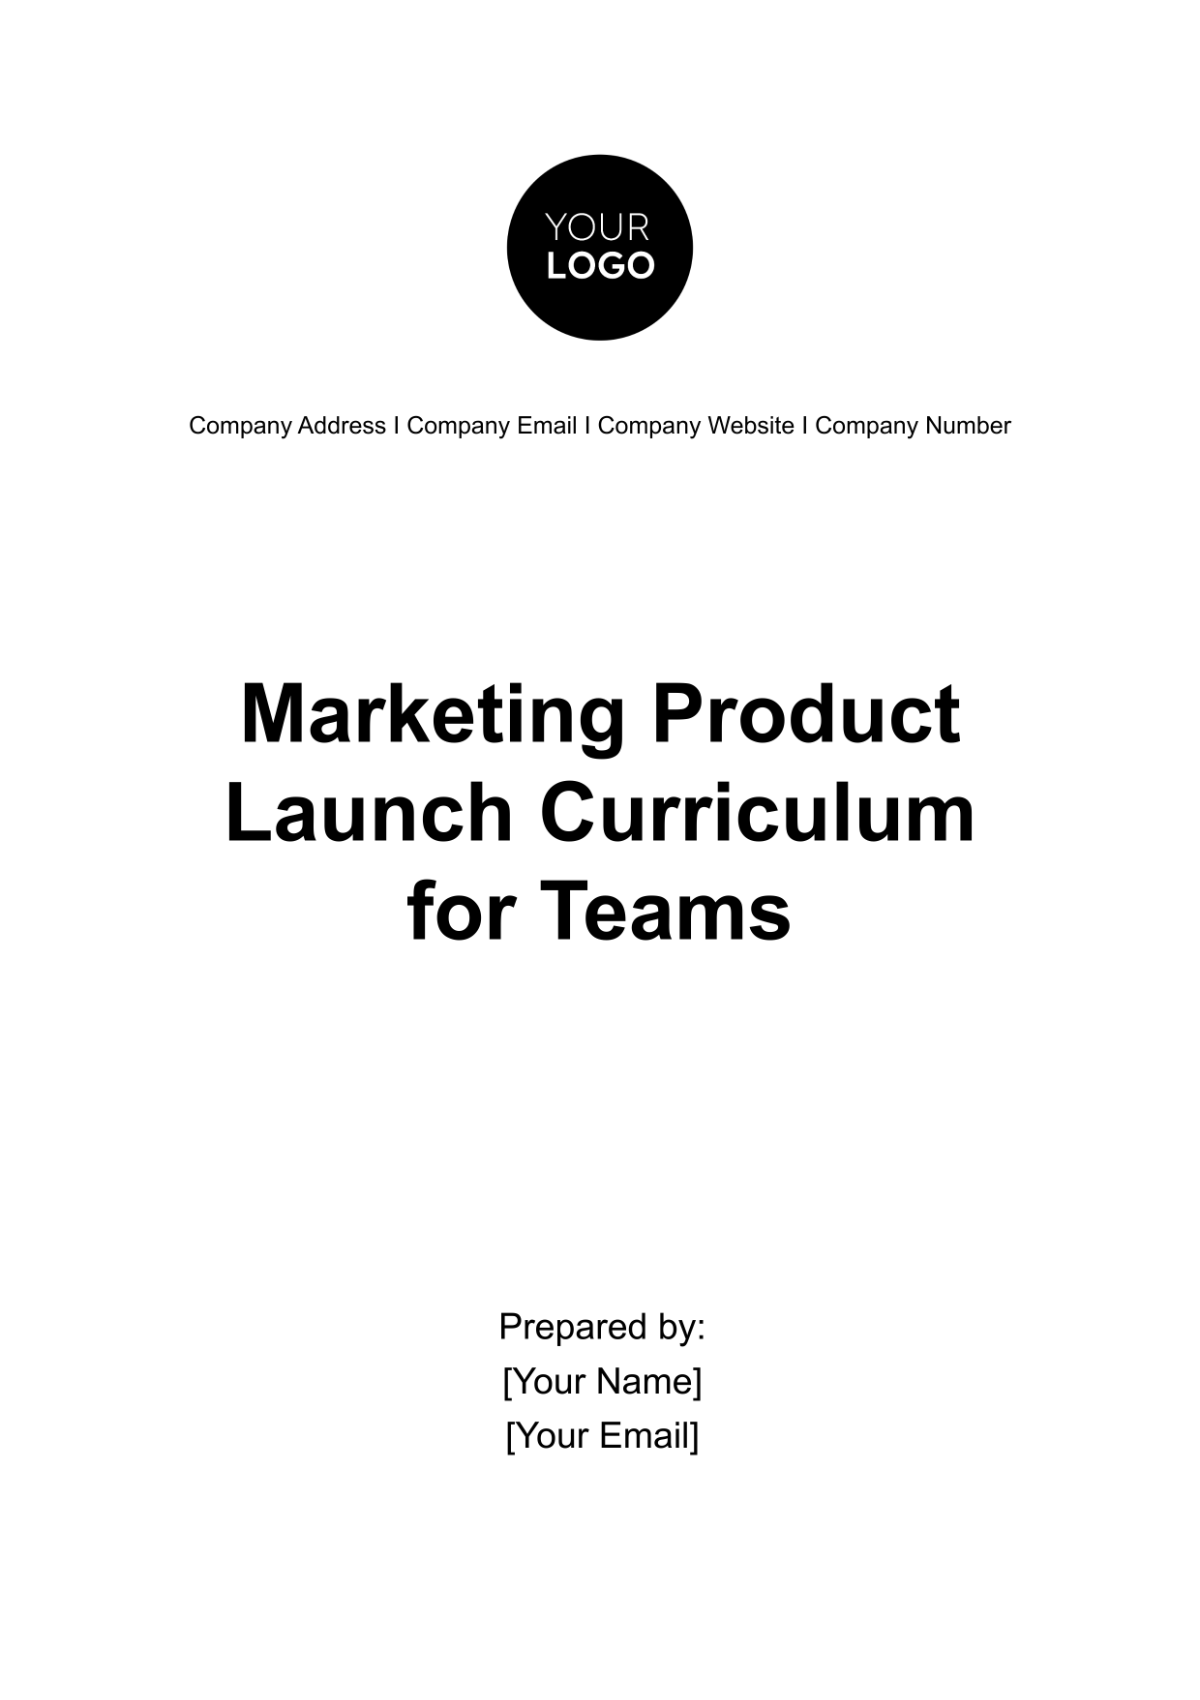 Free Marketing Product Launch Curriculum for Teams Template